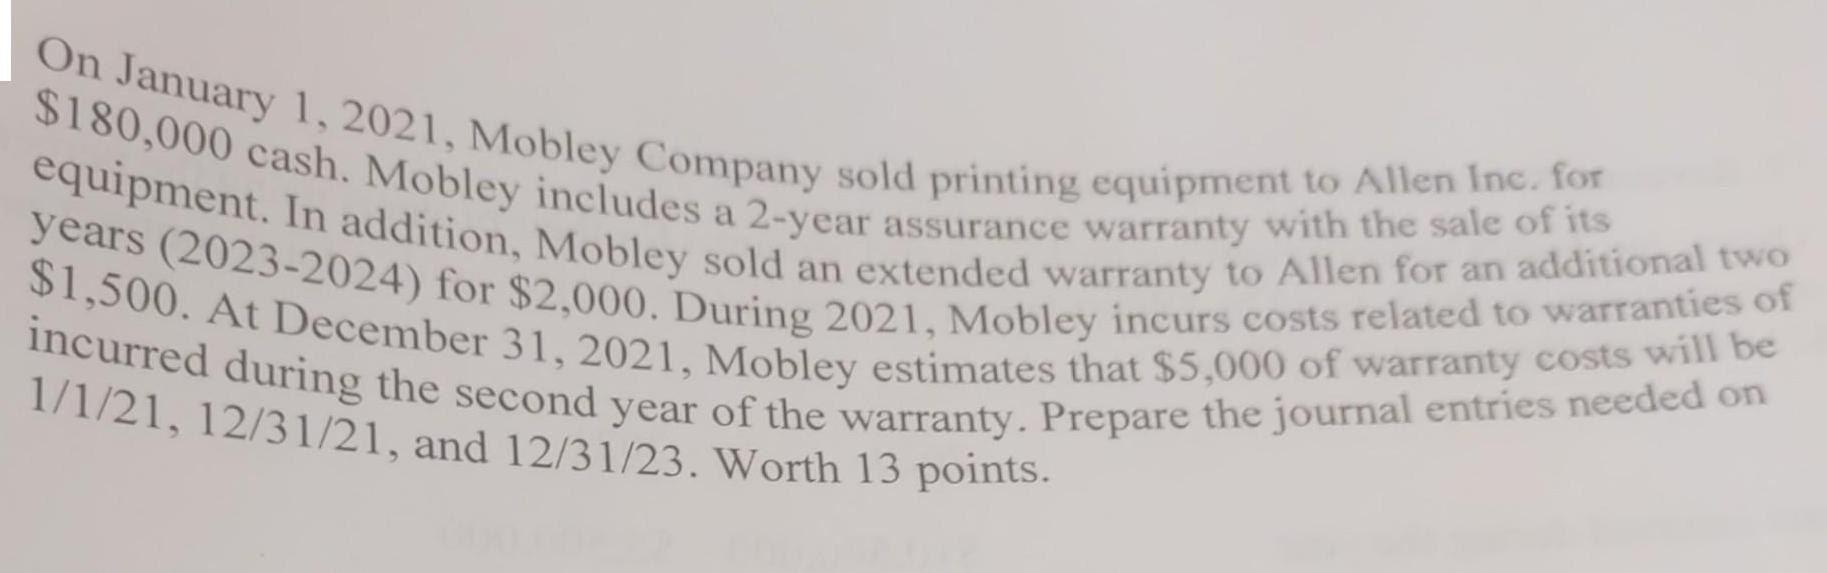 On January 1, 2021, Mobley Company sold printing equipment to Allen Inc. for $180,000 cash. Mobley includes a